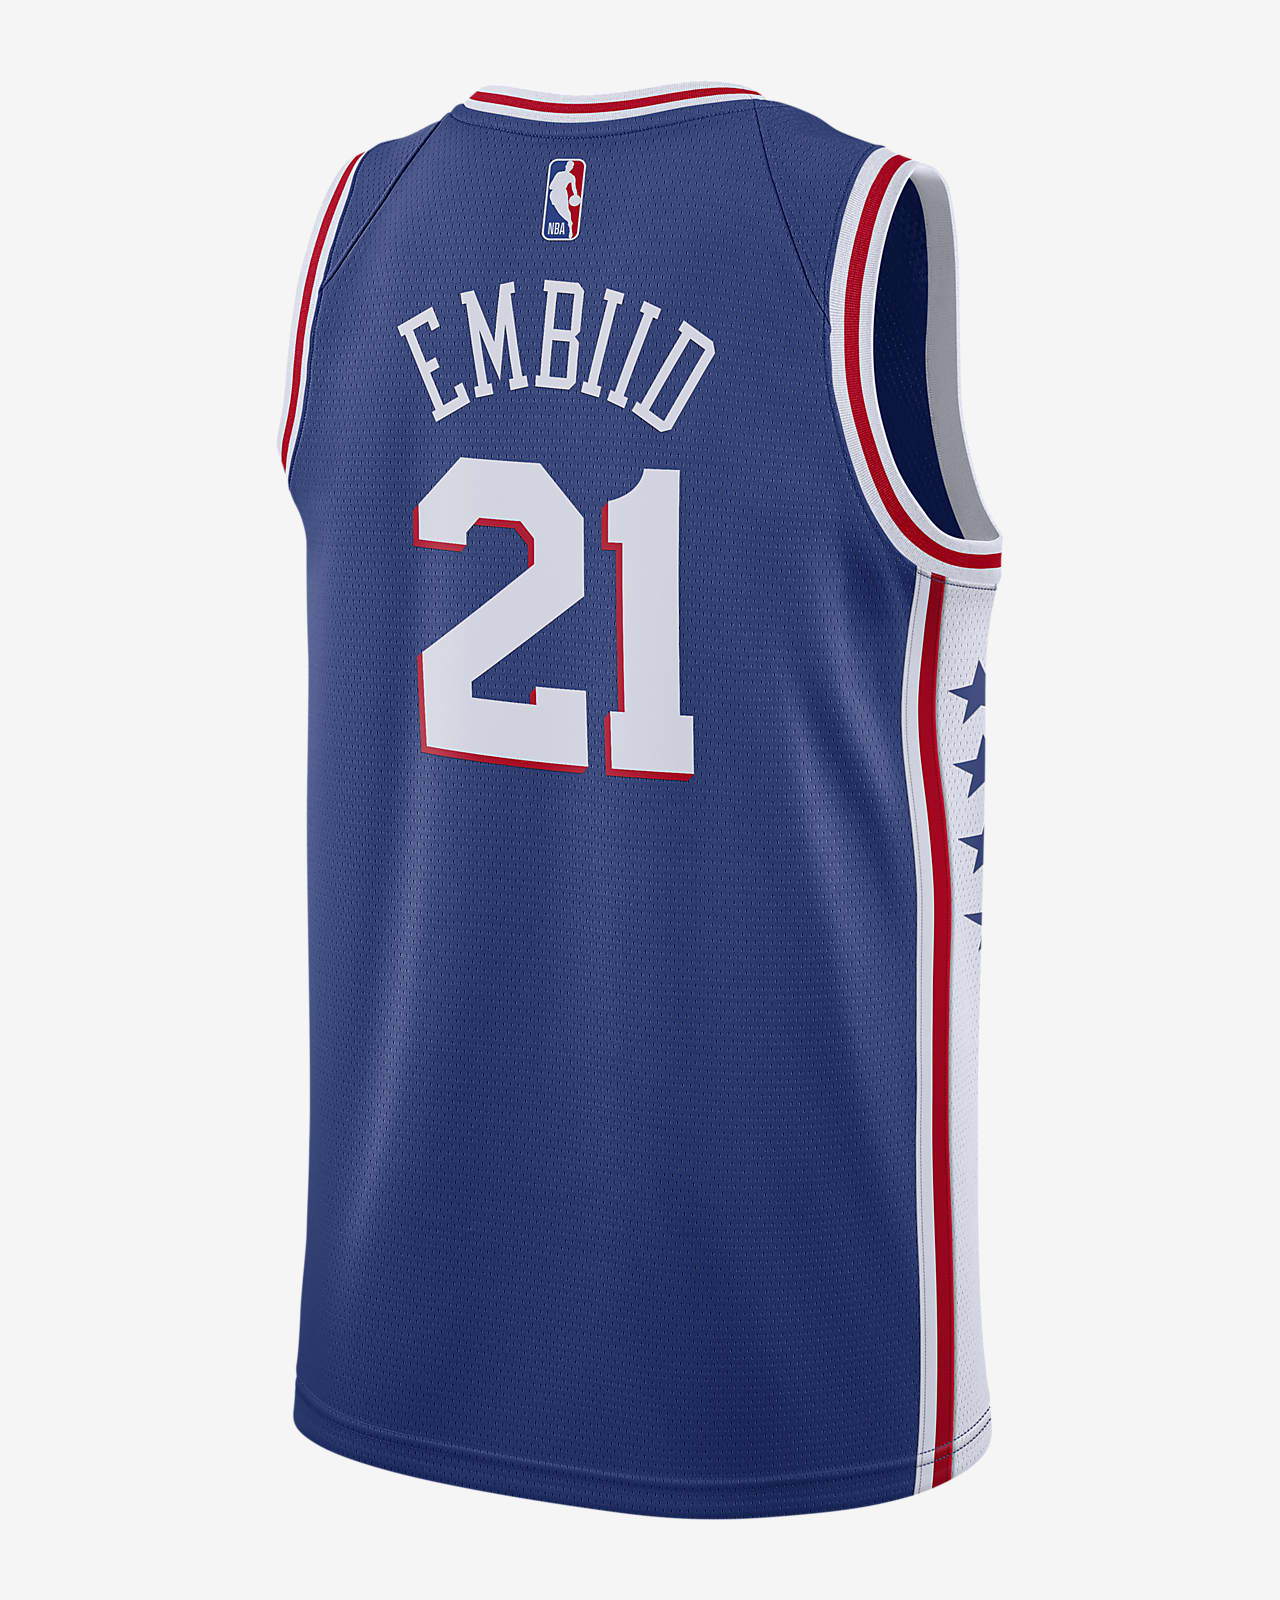 Sixers Off White Jersey / Official Philadelphia 76ers Jerseys Sixers ...